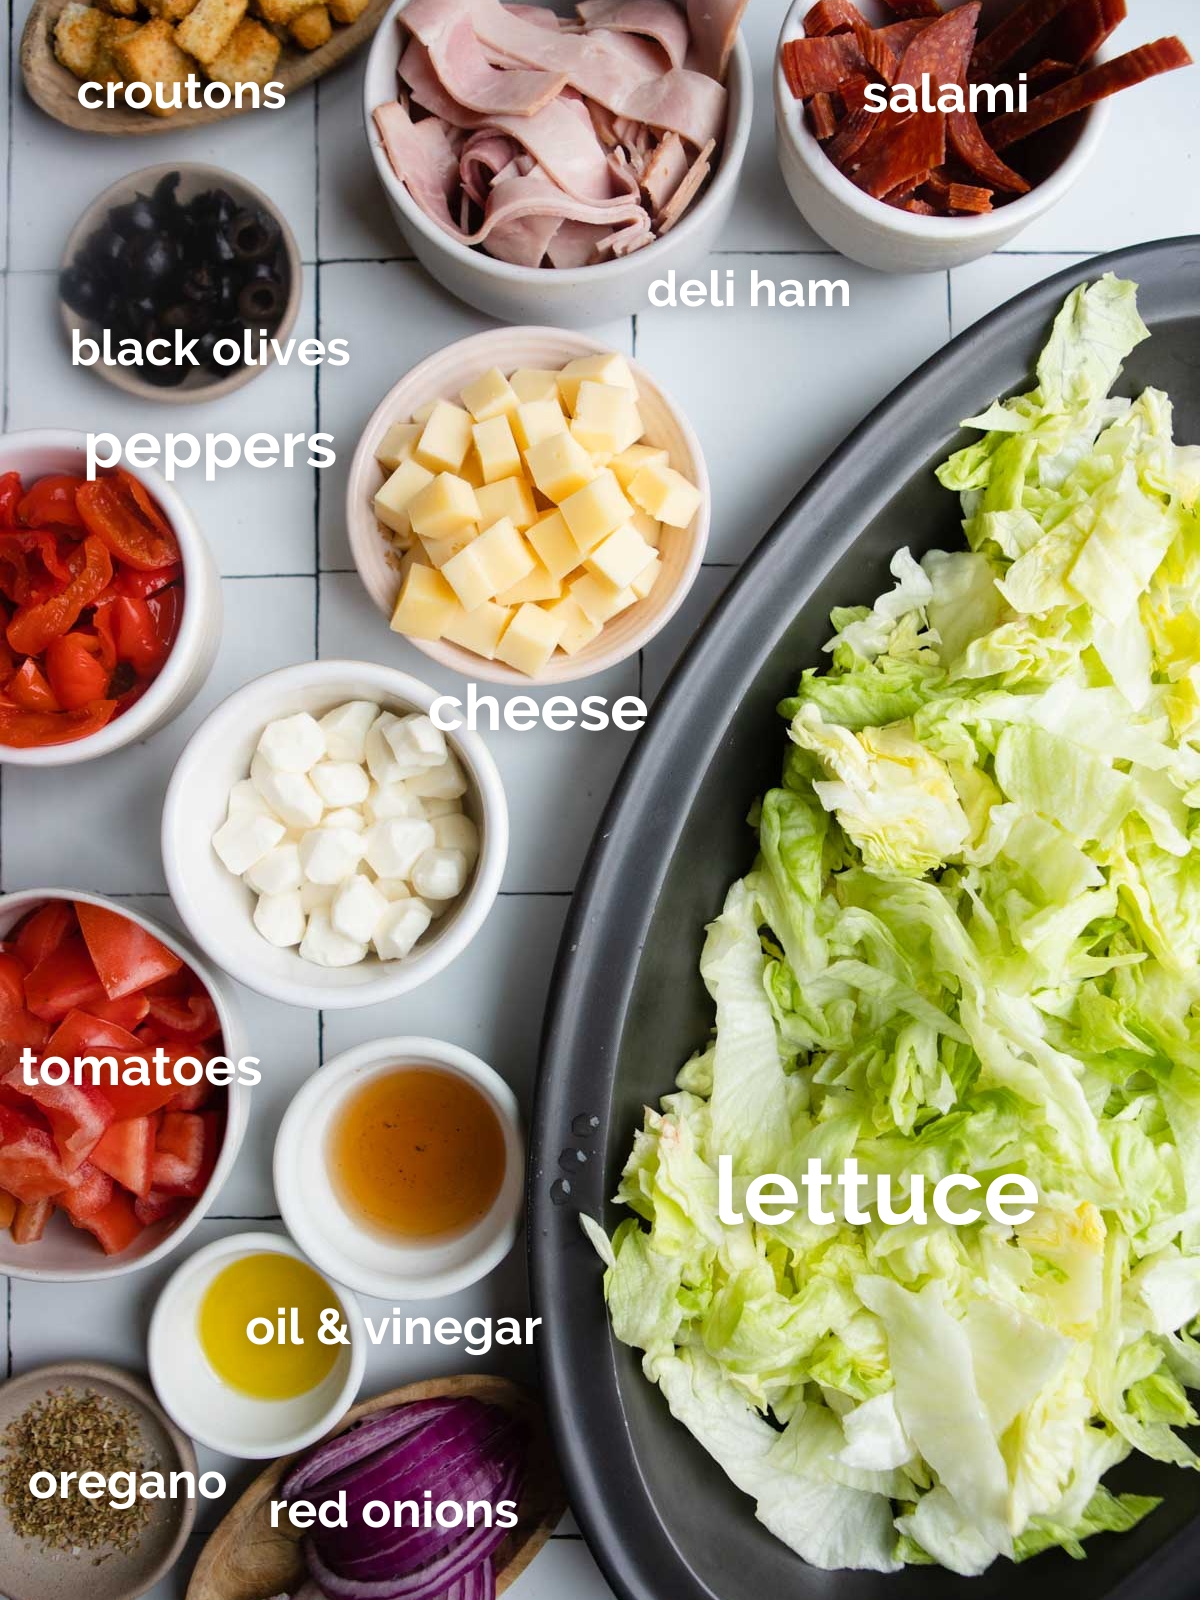 ingredients for Italian sub salad in small white bowls